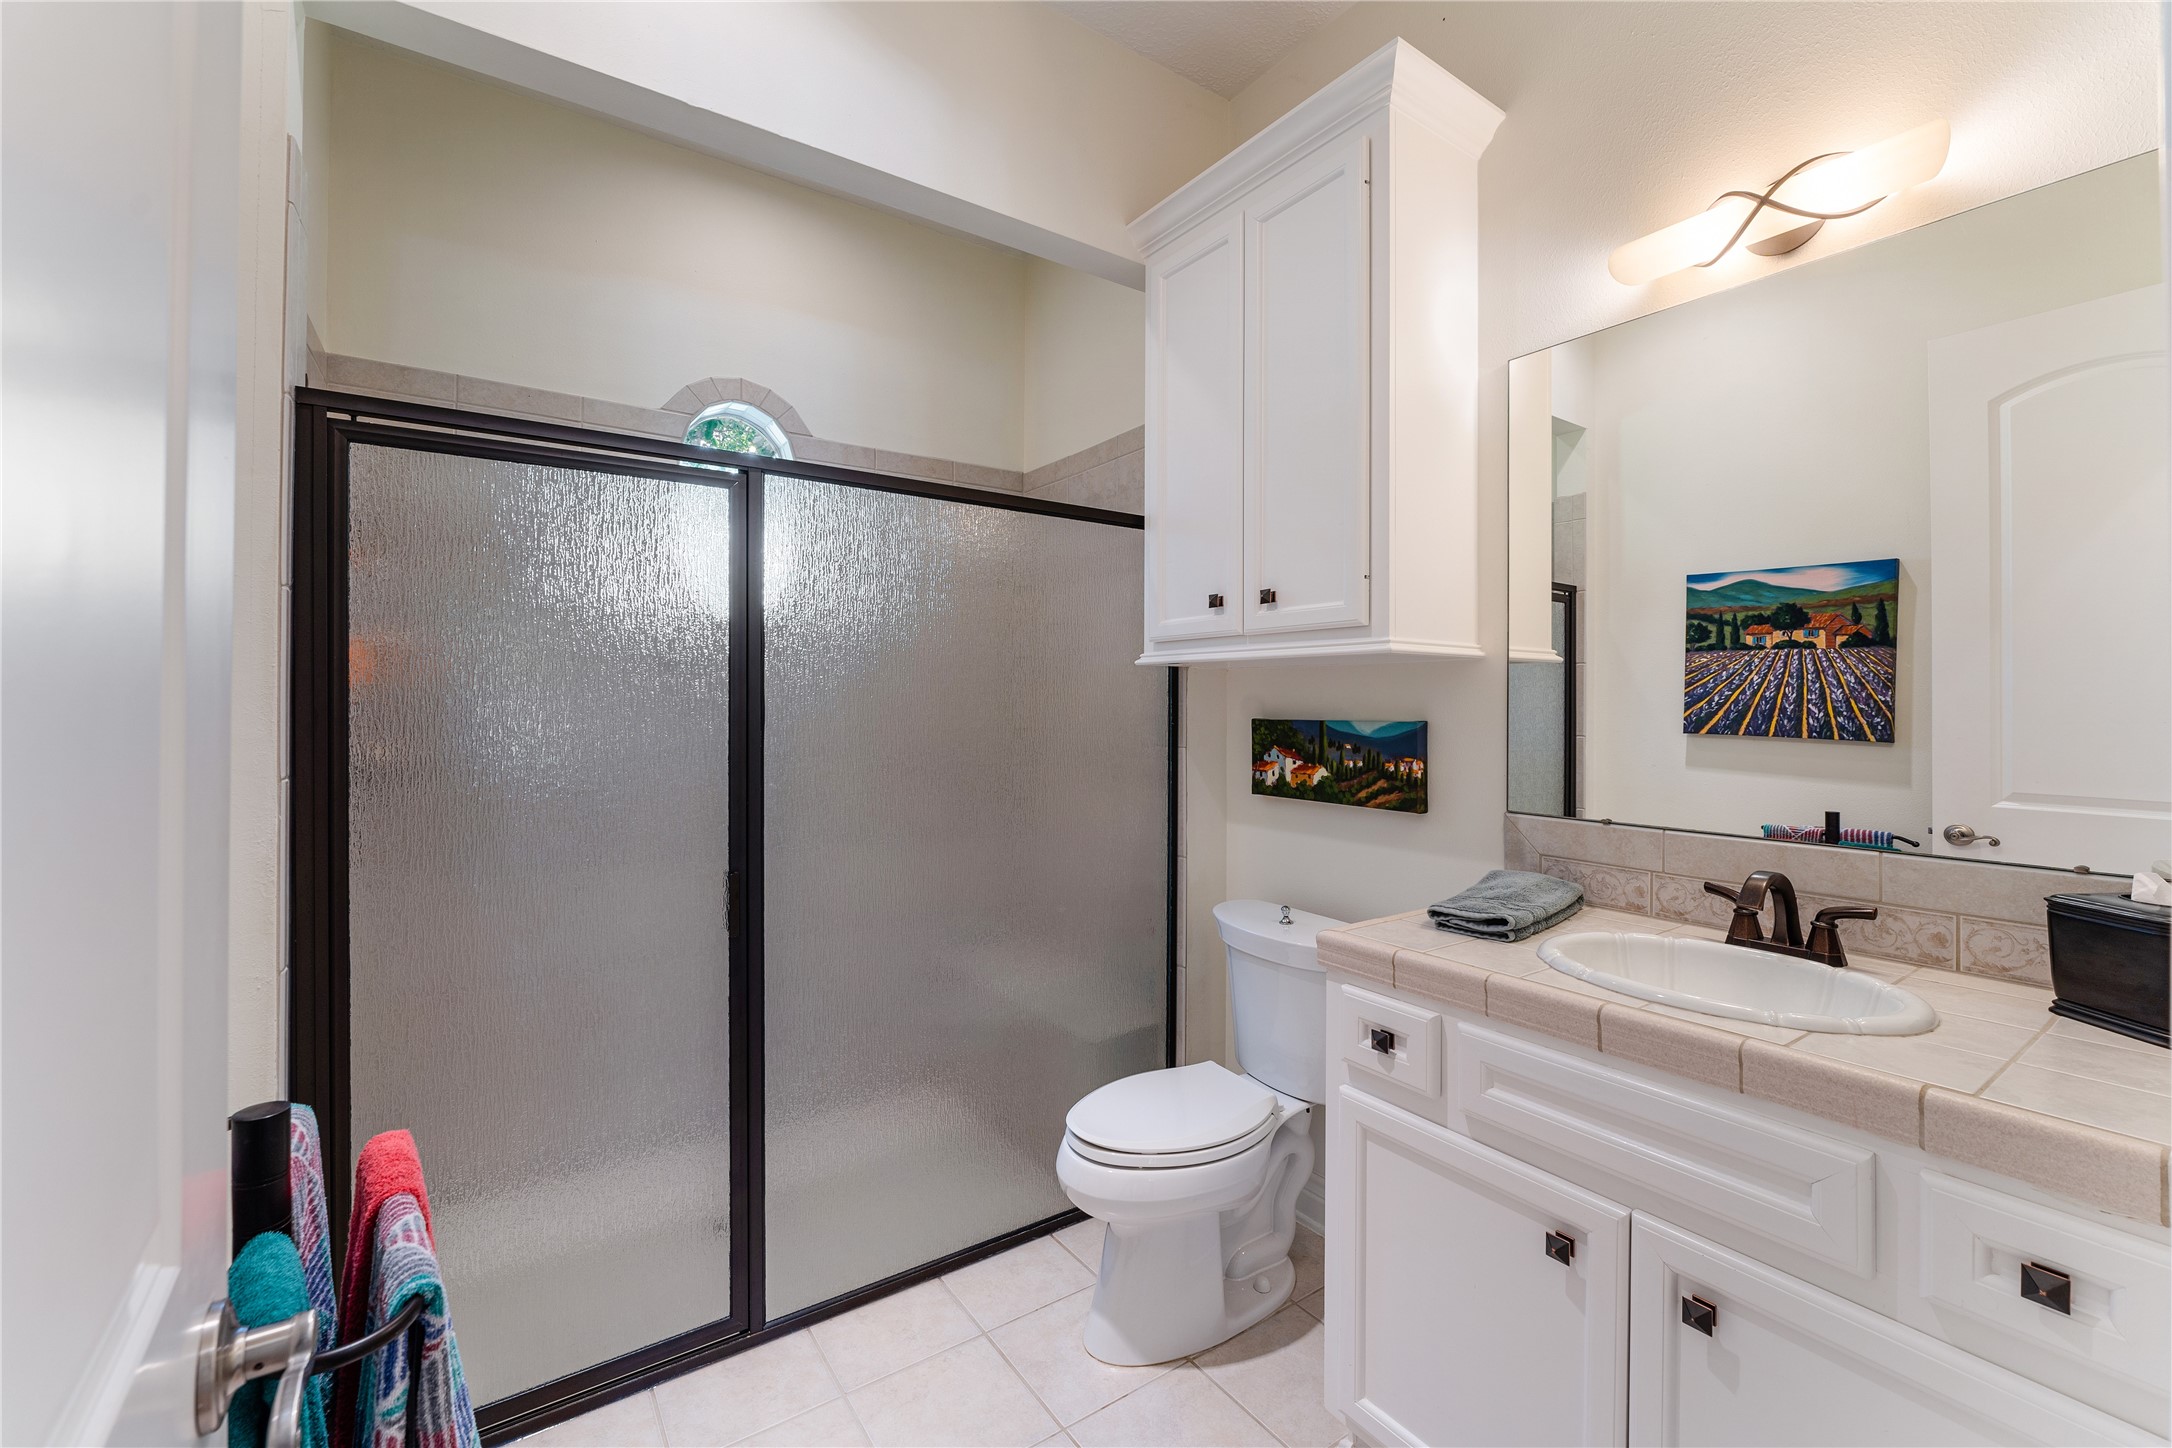 The guest bathroom is equipped with a single vanity and a walk-in shower with a glass enclosure.